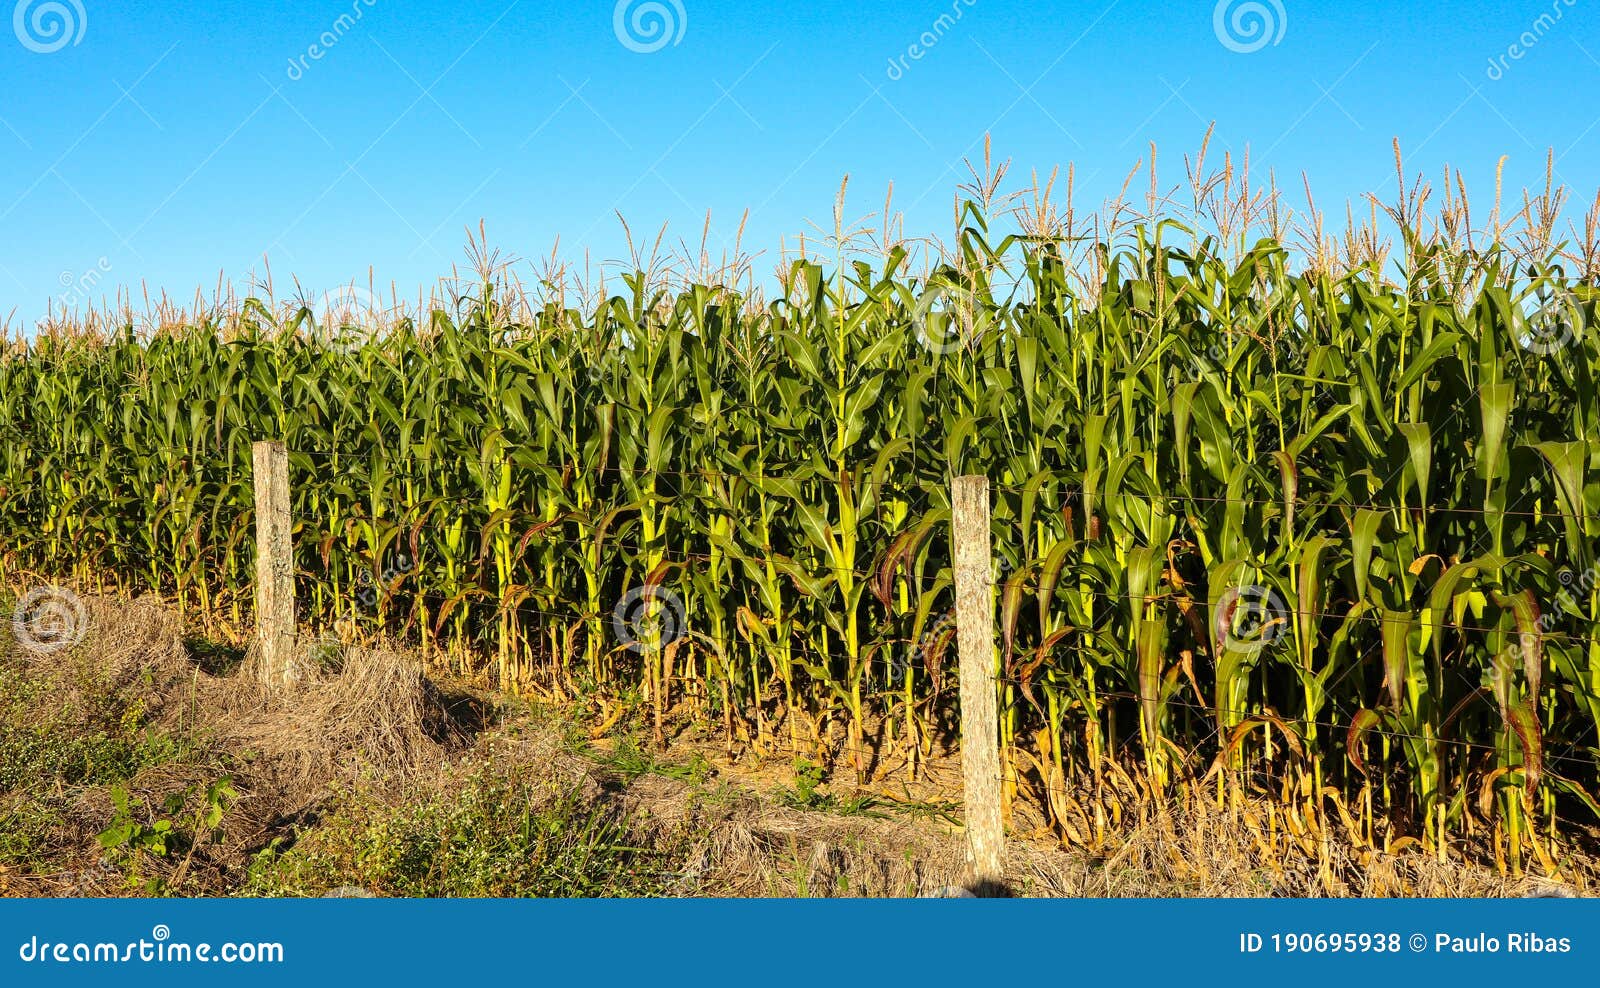 corn a noble agricultural crop in brazil